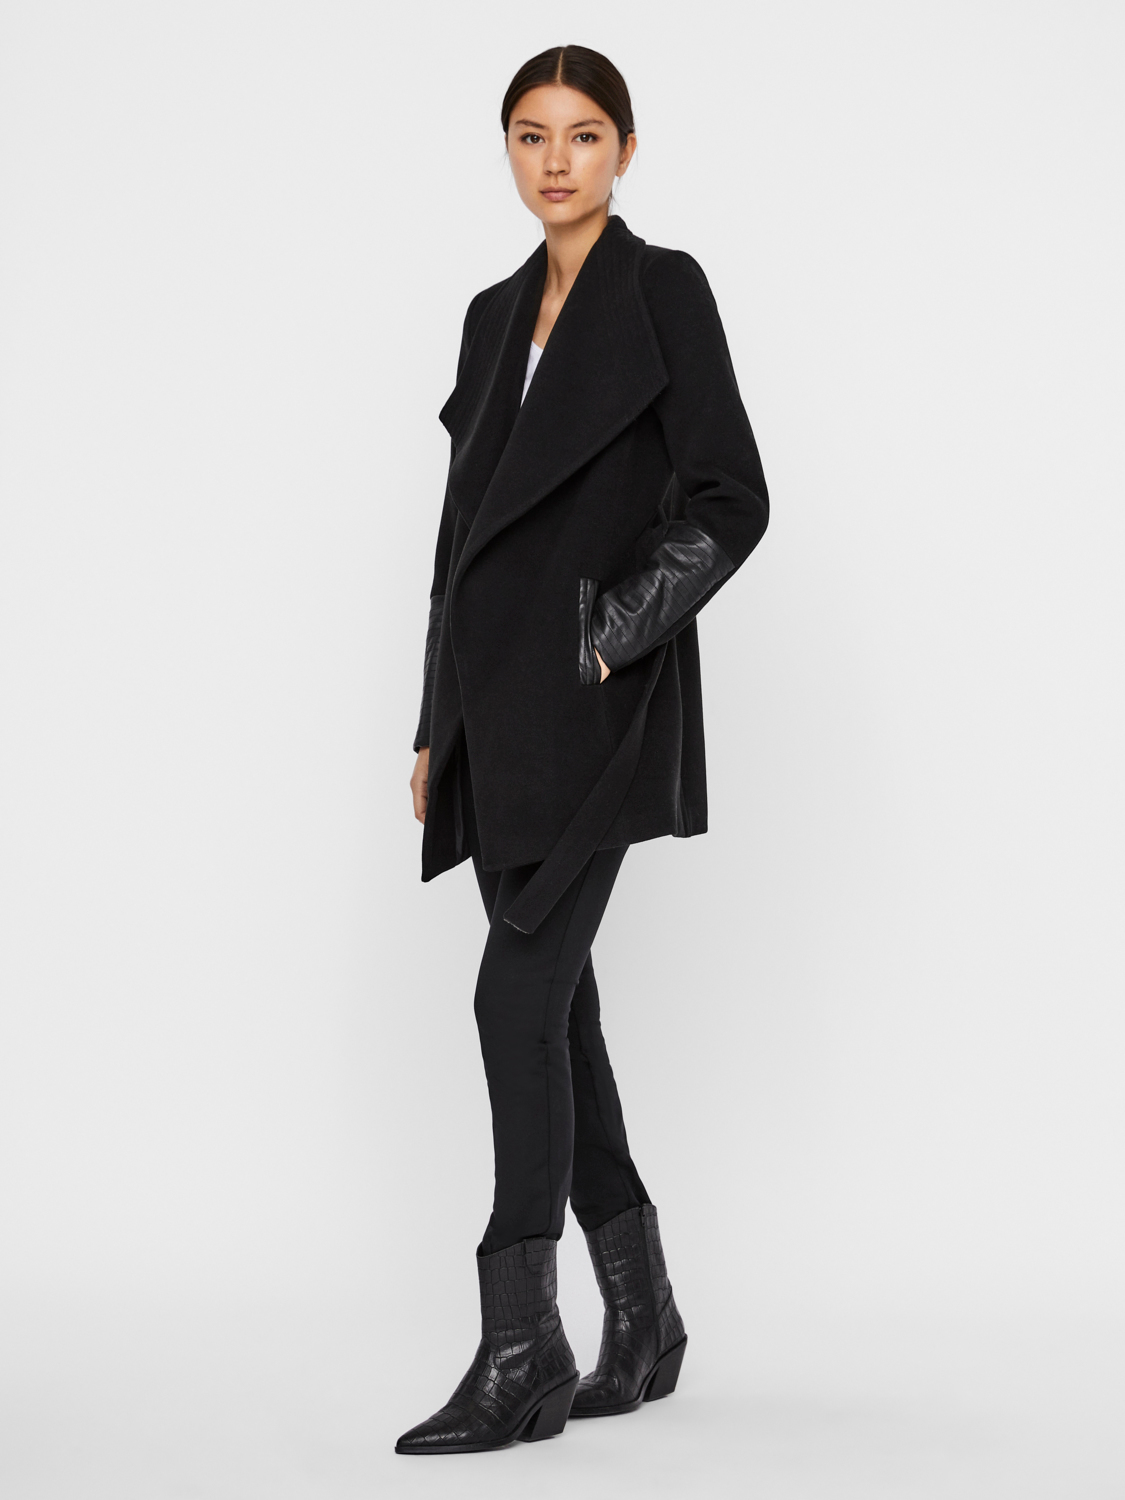 Cala coat with faux leather sleeves, BLACK, large